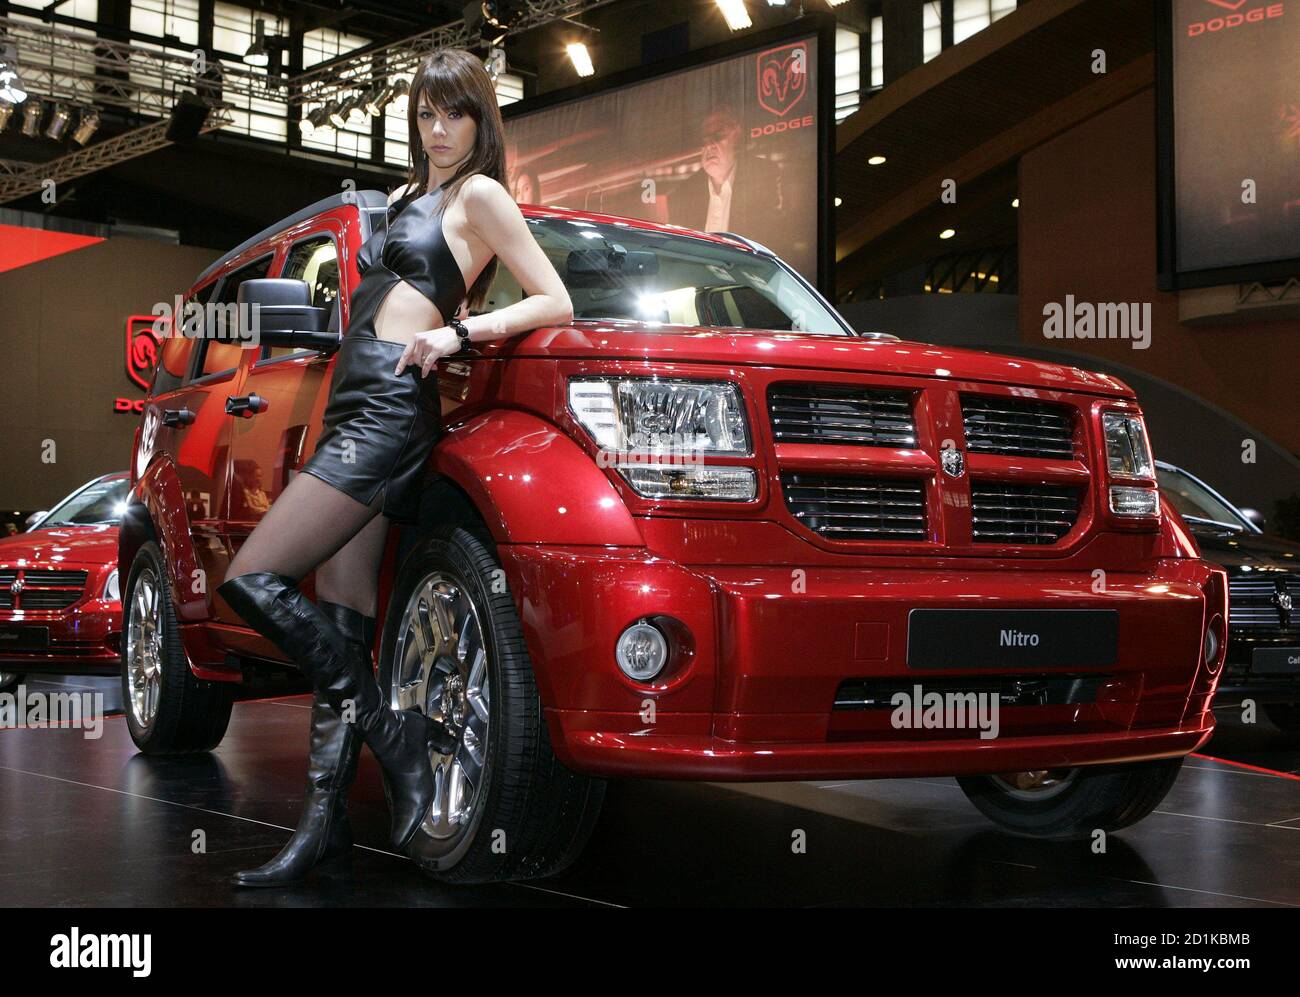 A model poses next to a Dodge Nitro before the opening of the International  Motor Show